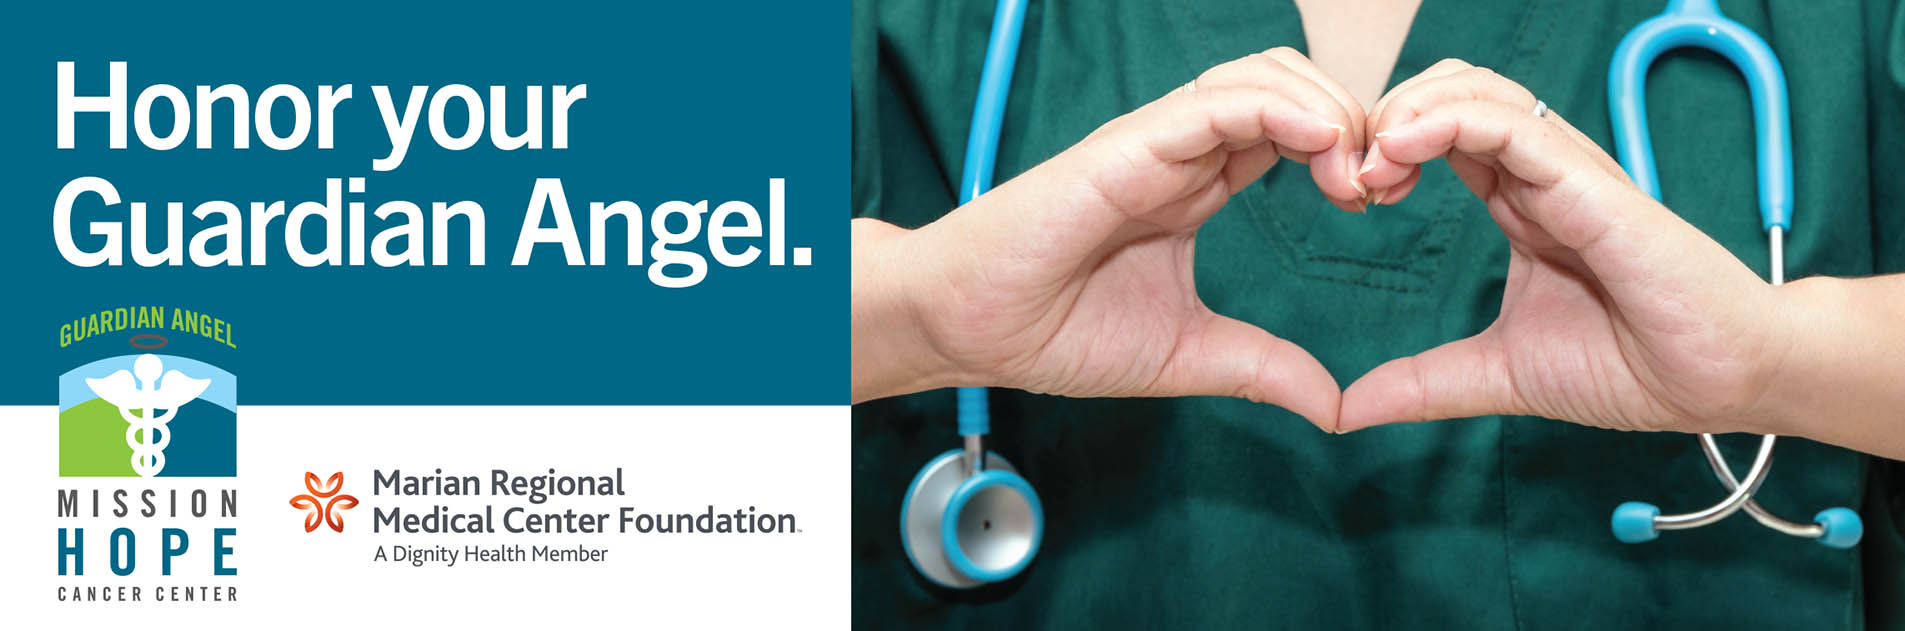 Honor your Guardian Angel - Mission Hope Cancer Center